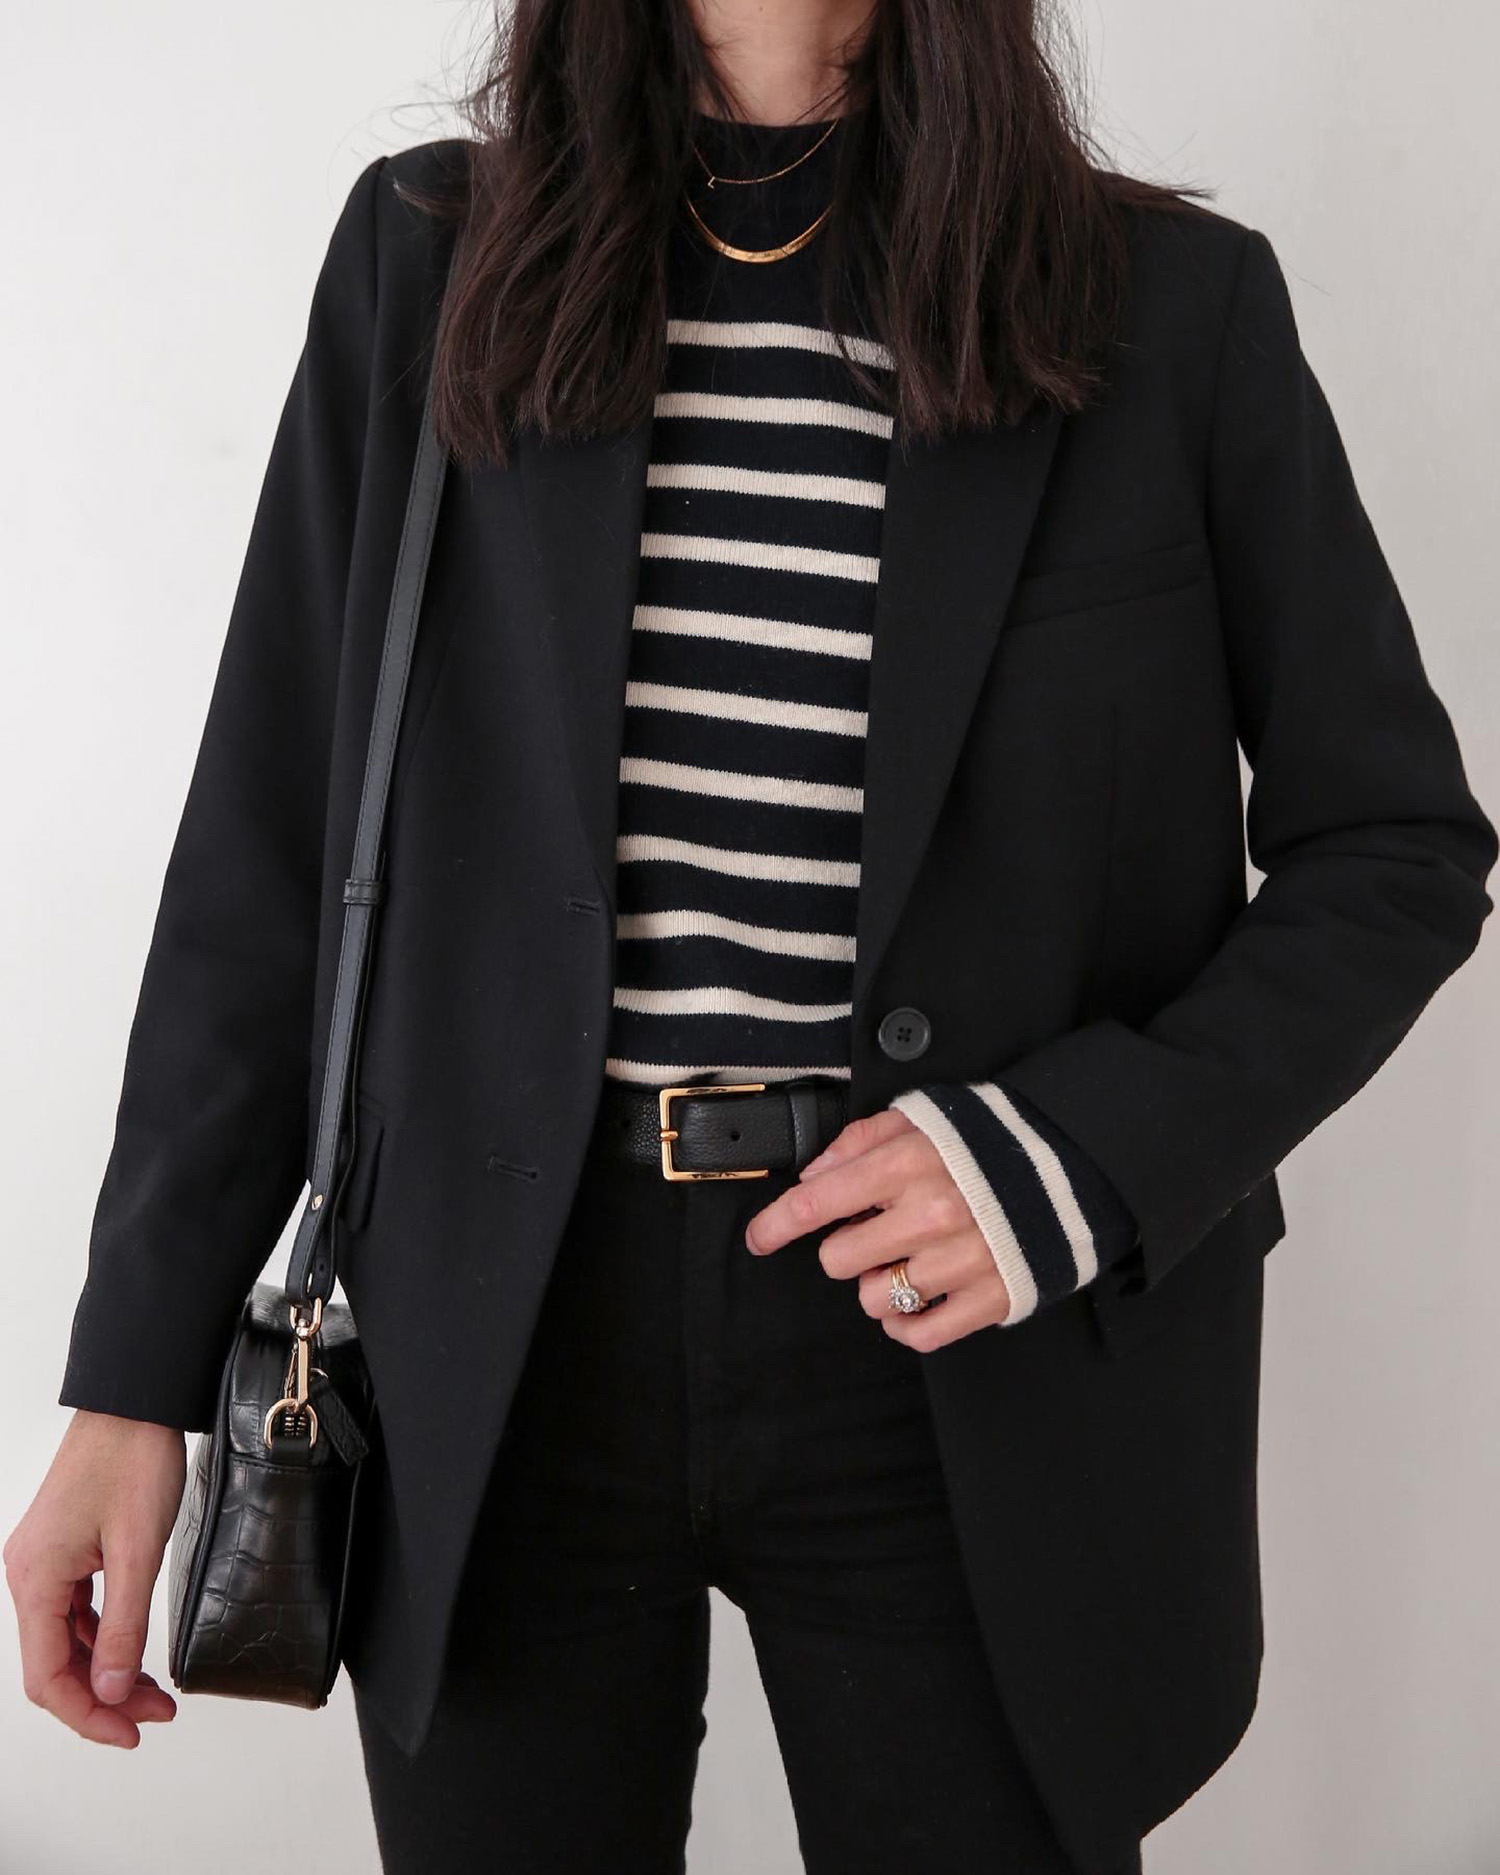 Wearing Celine striped mariniere with Everlane blazer and Reformation jeans